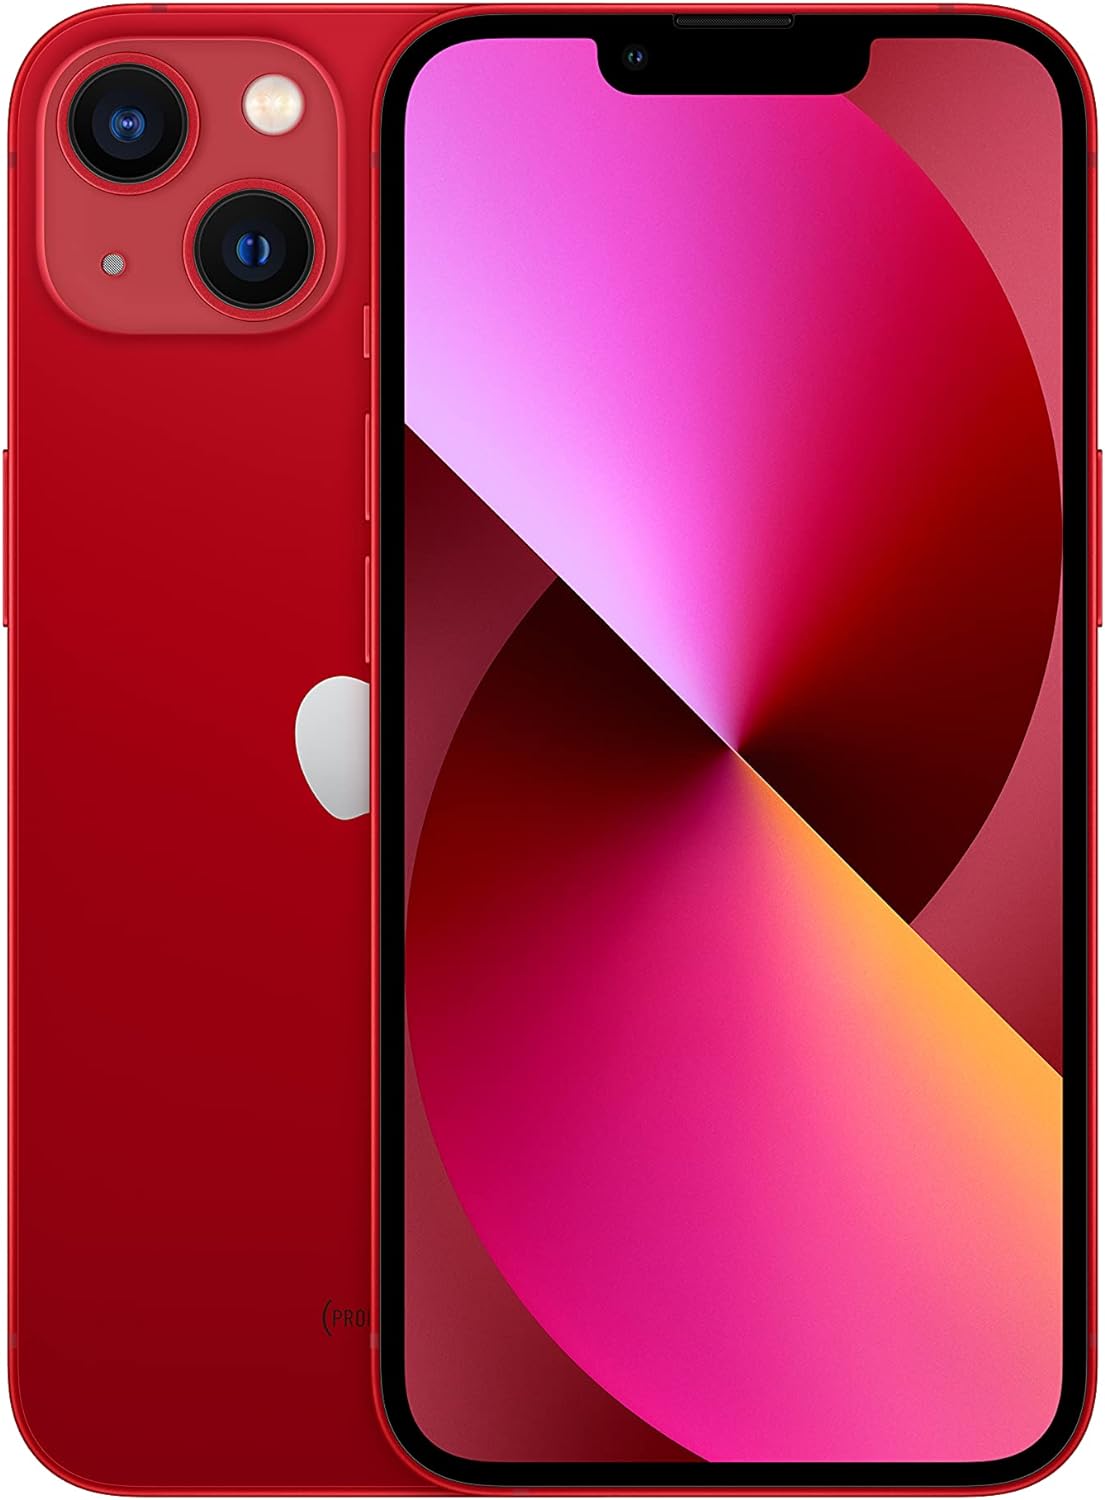 iPhone 13 (256GB) - (PRODUCT) RED: 6.1-inch Super Retina XDR display for stunning visuals. 0194252709191